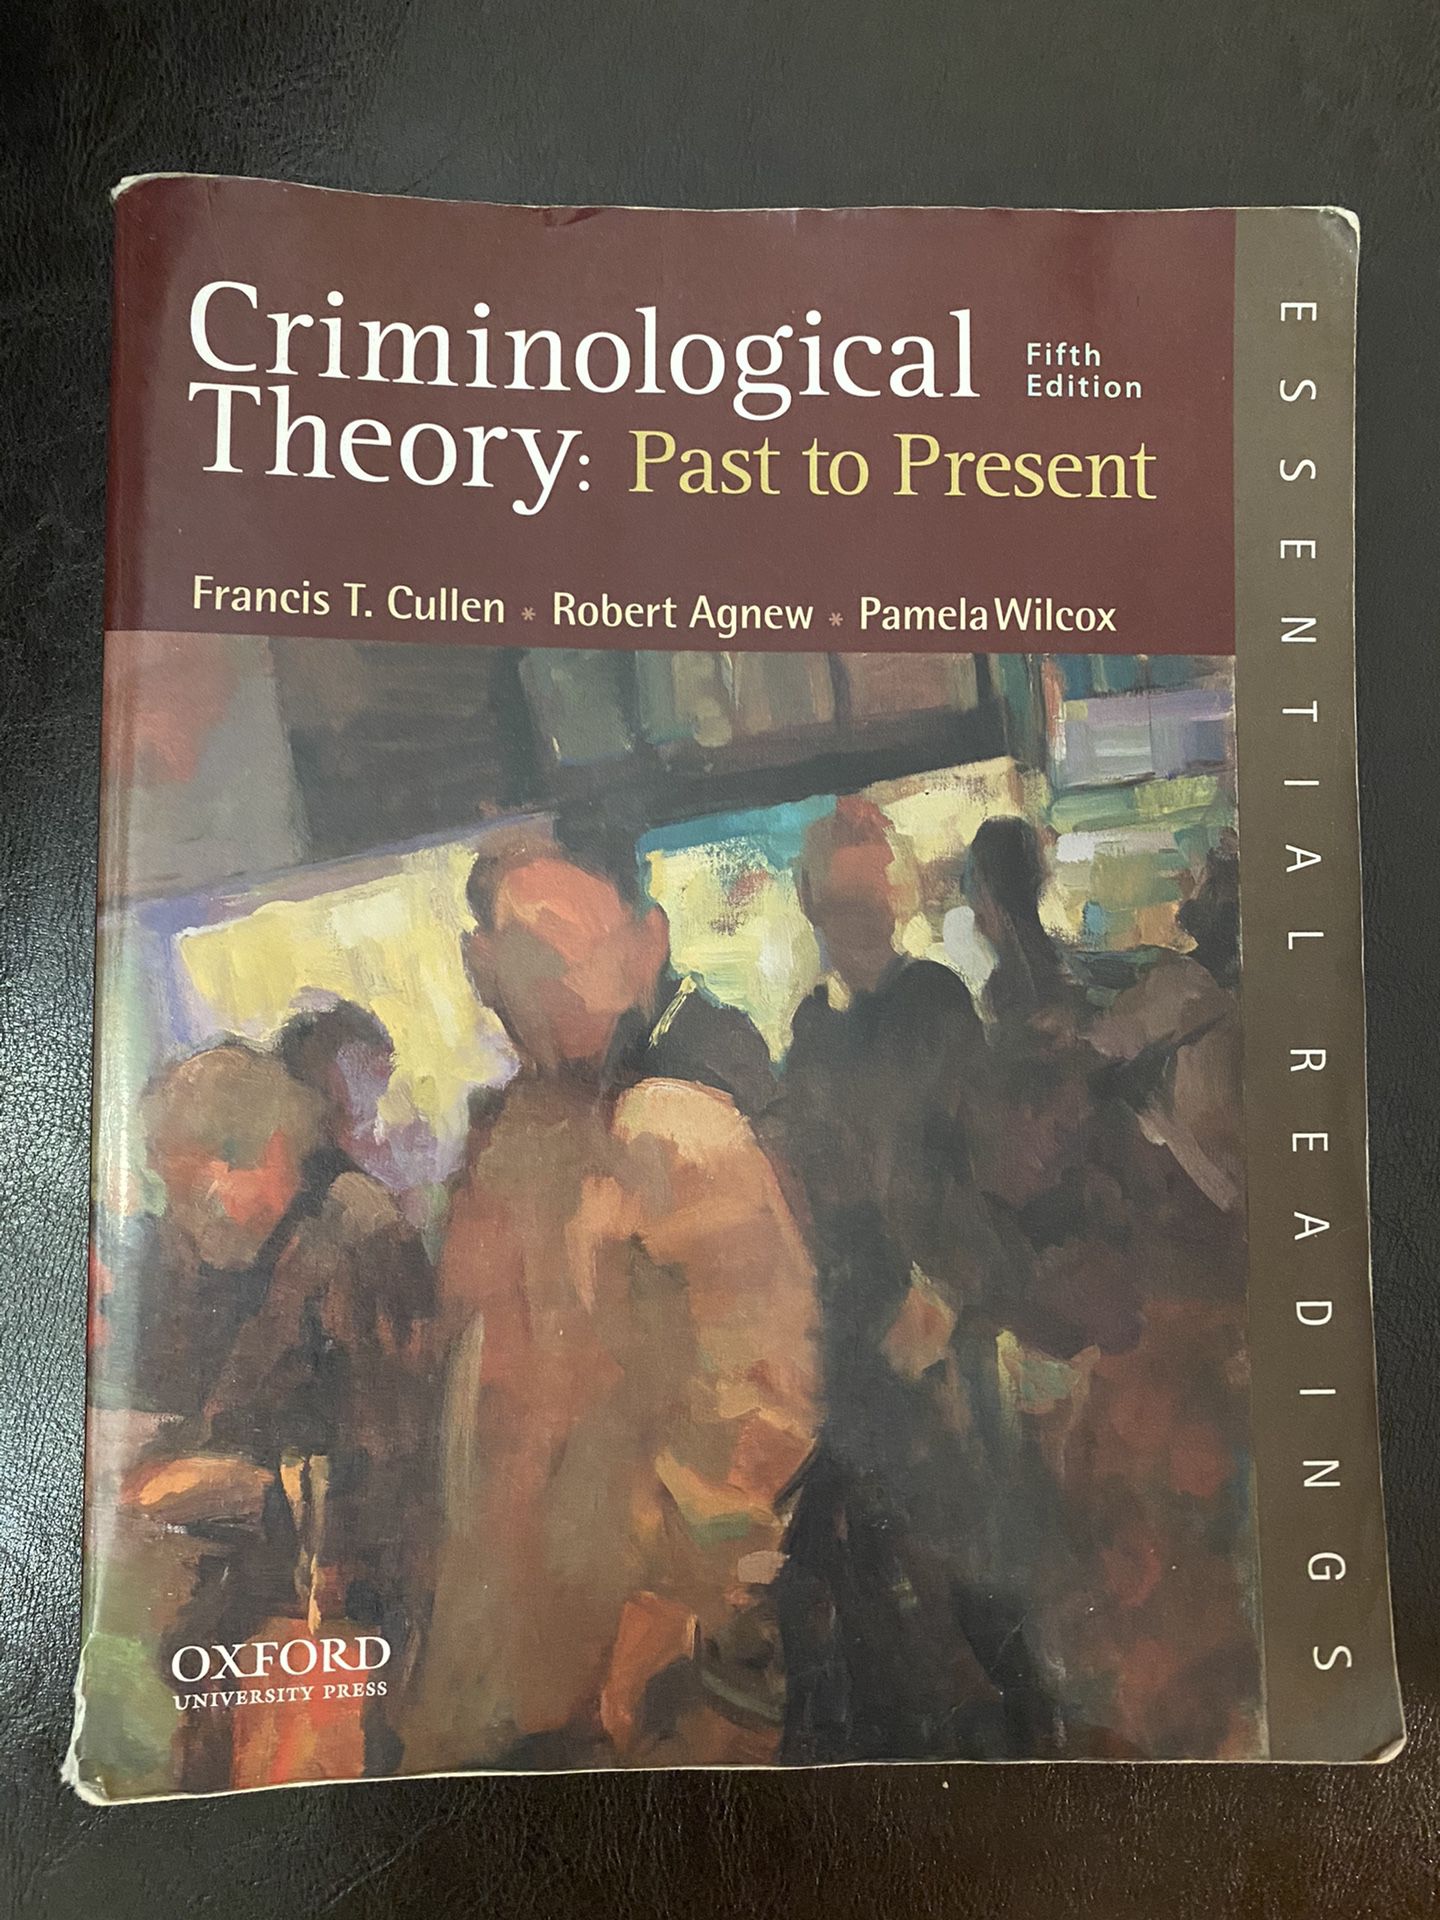 Criminological Theory: Past to Present